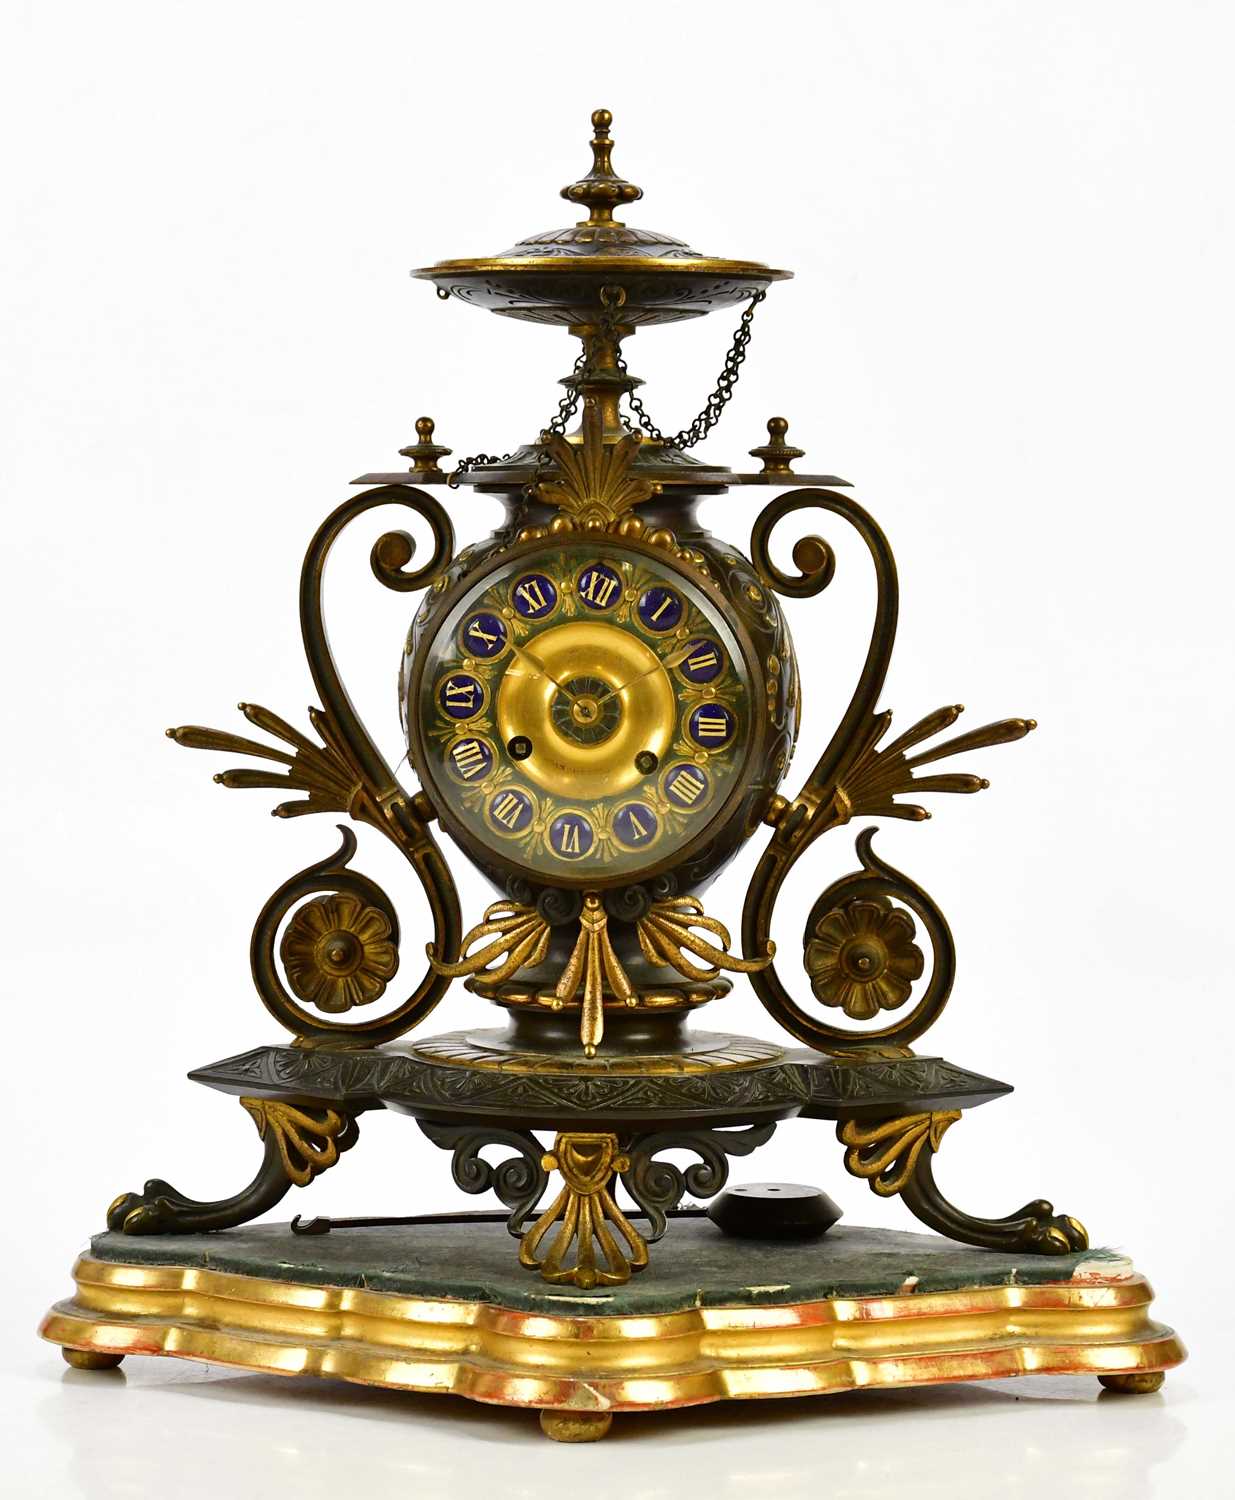 An aesthetic movement French bronze and gilt metal mantel clock with circular finial above the